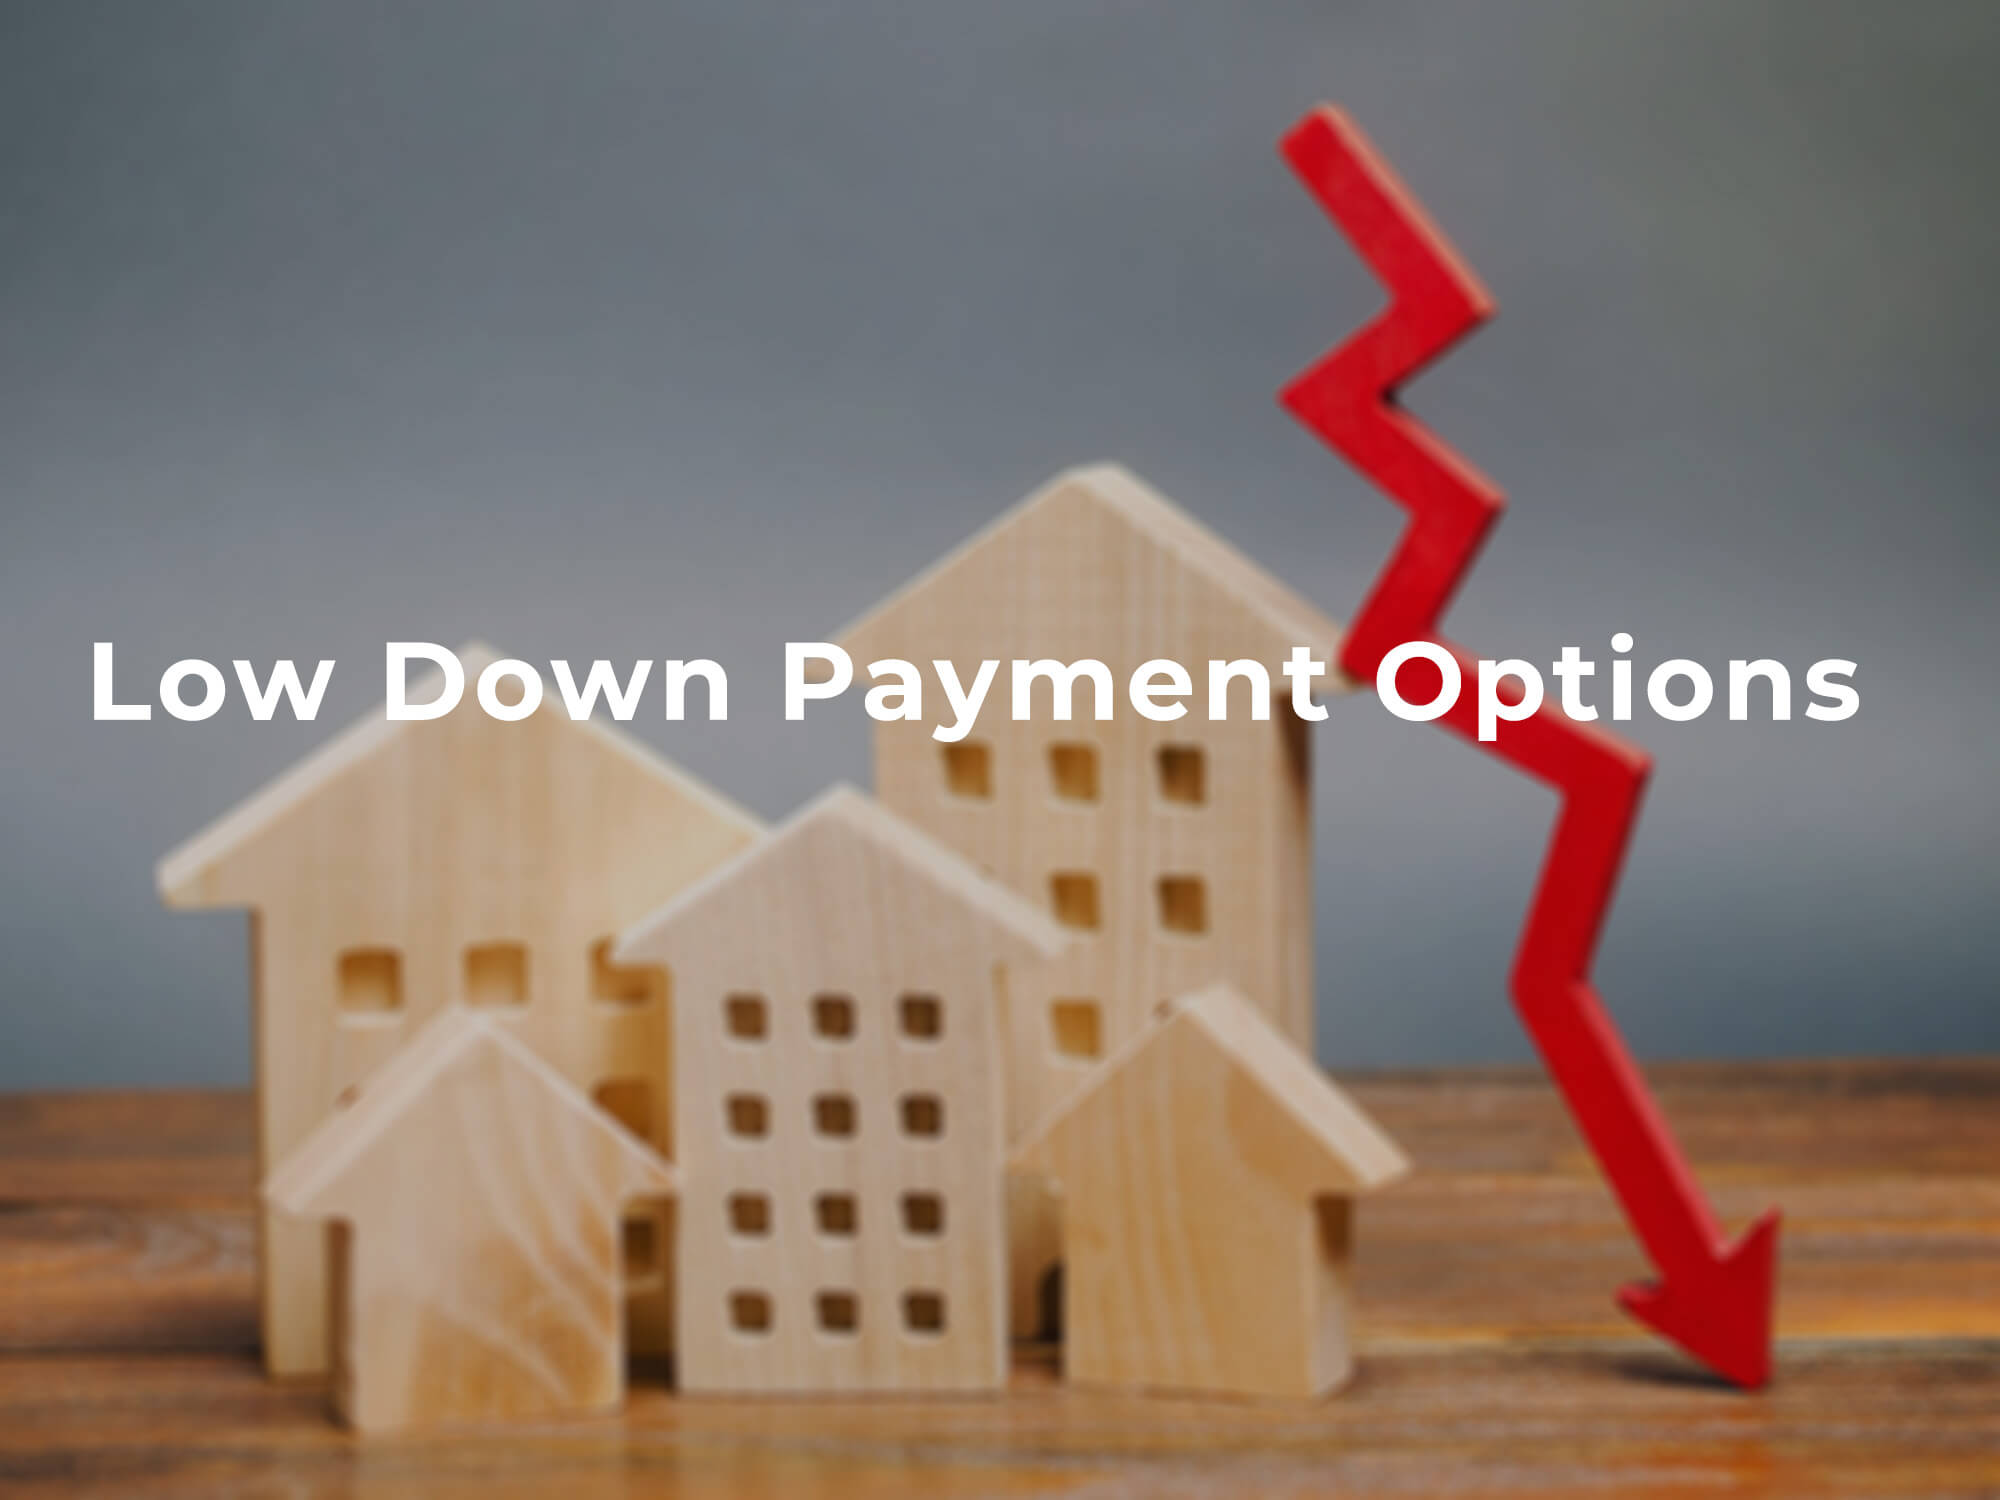 Low Down Payment Options